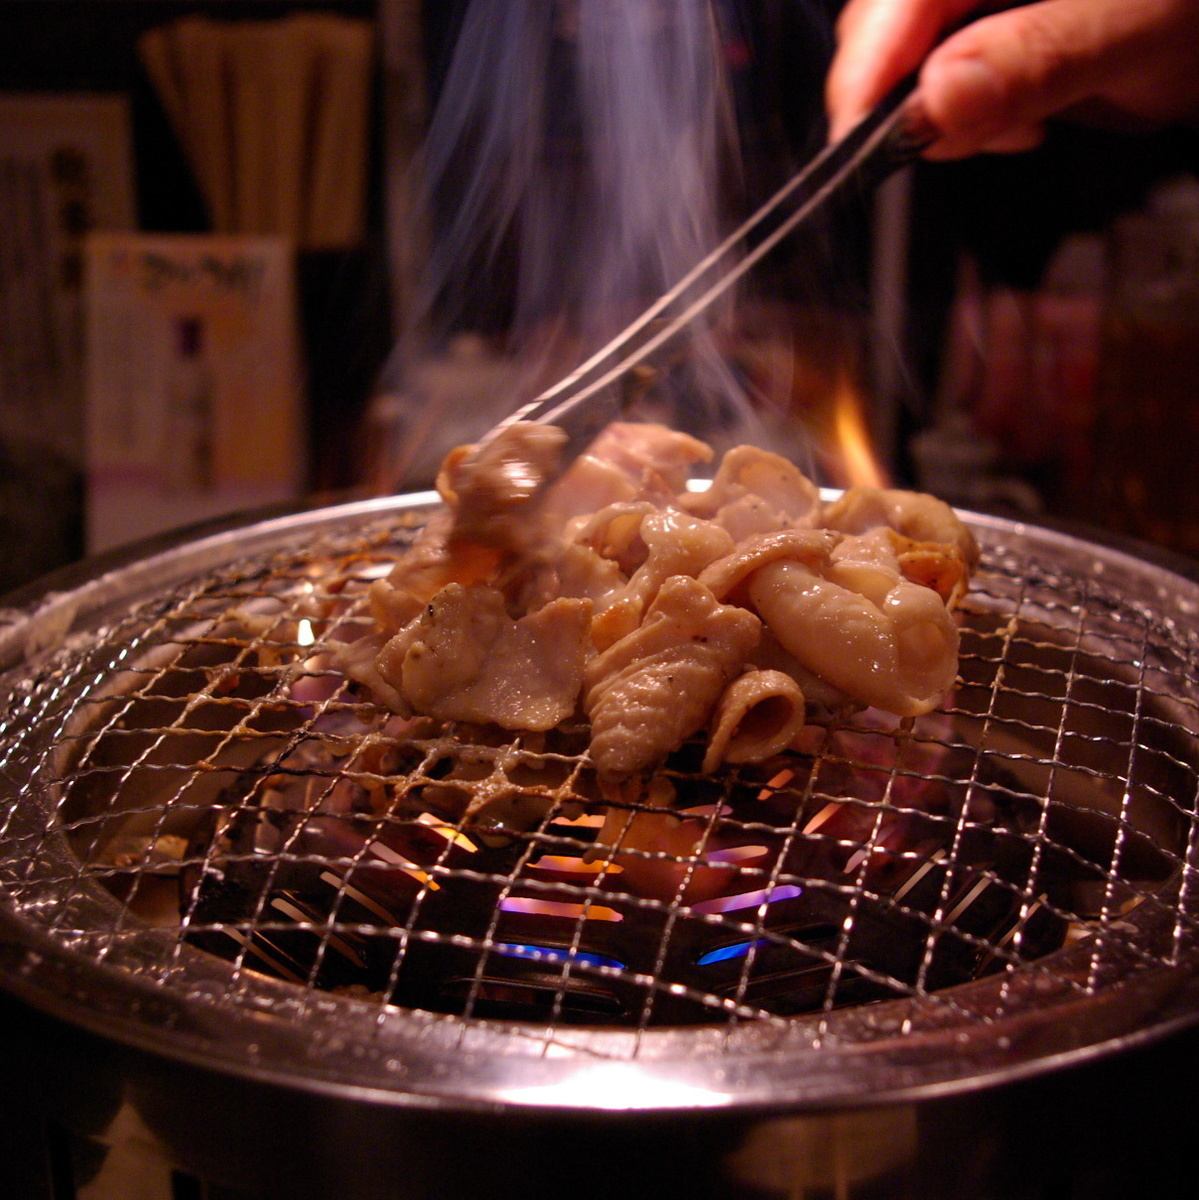 All-you-can-drink is 1,480 yen for women and 1,980 yen for men.Enjoy delicious meat and sake!